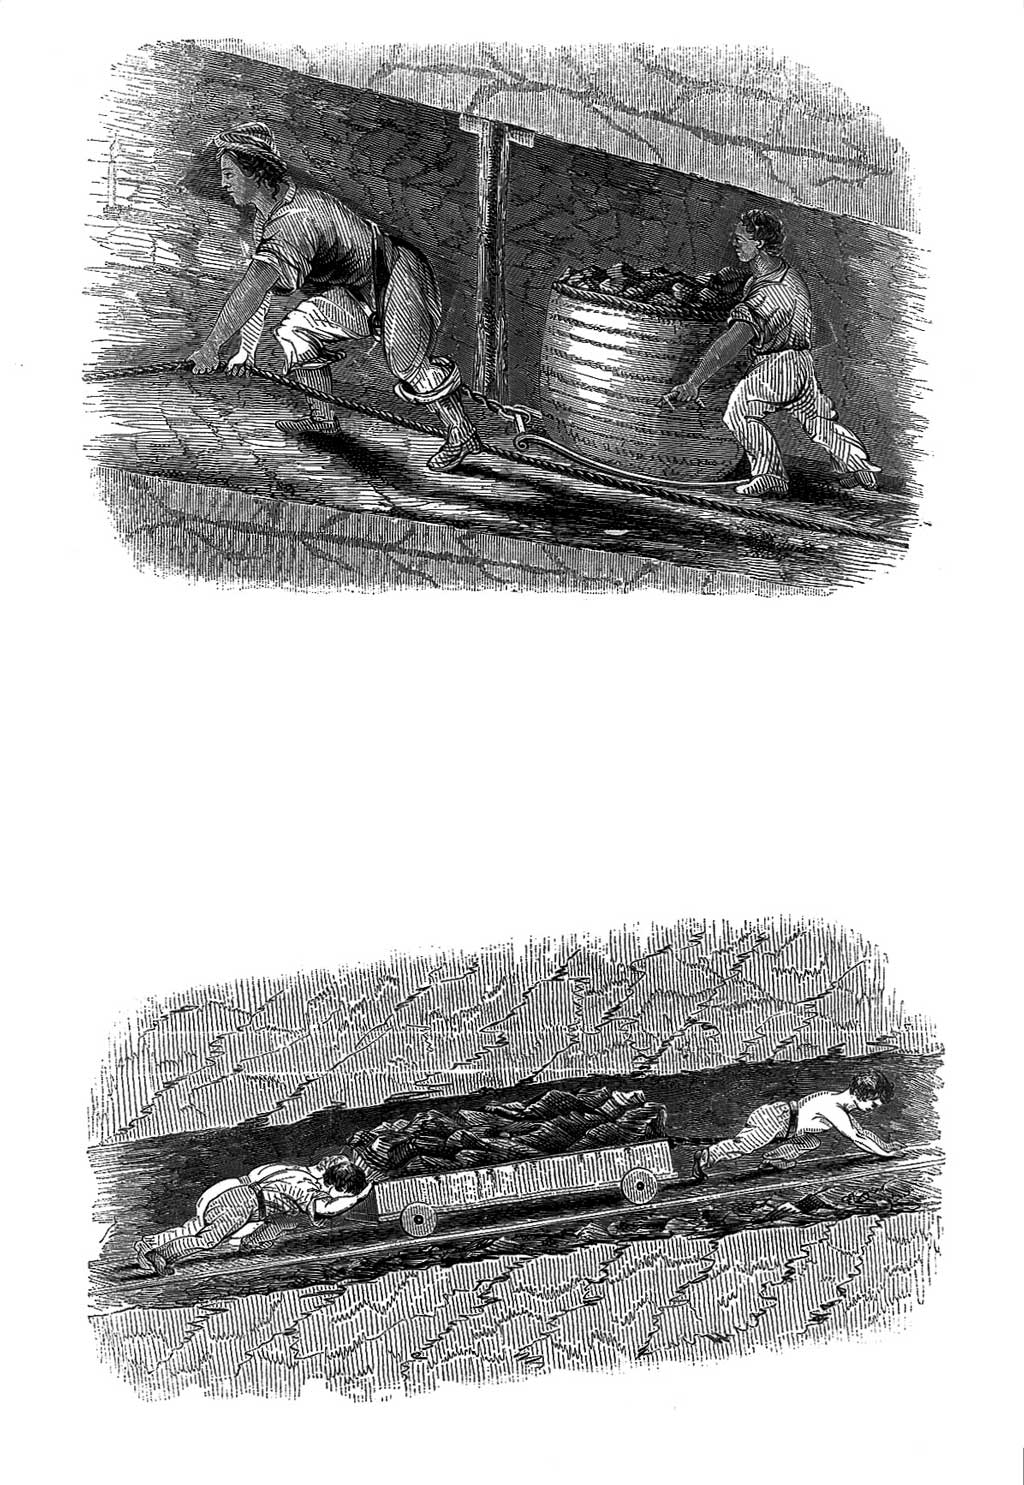 Illustrations of children working in mines, pushing coal wagons through narrow tunnels